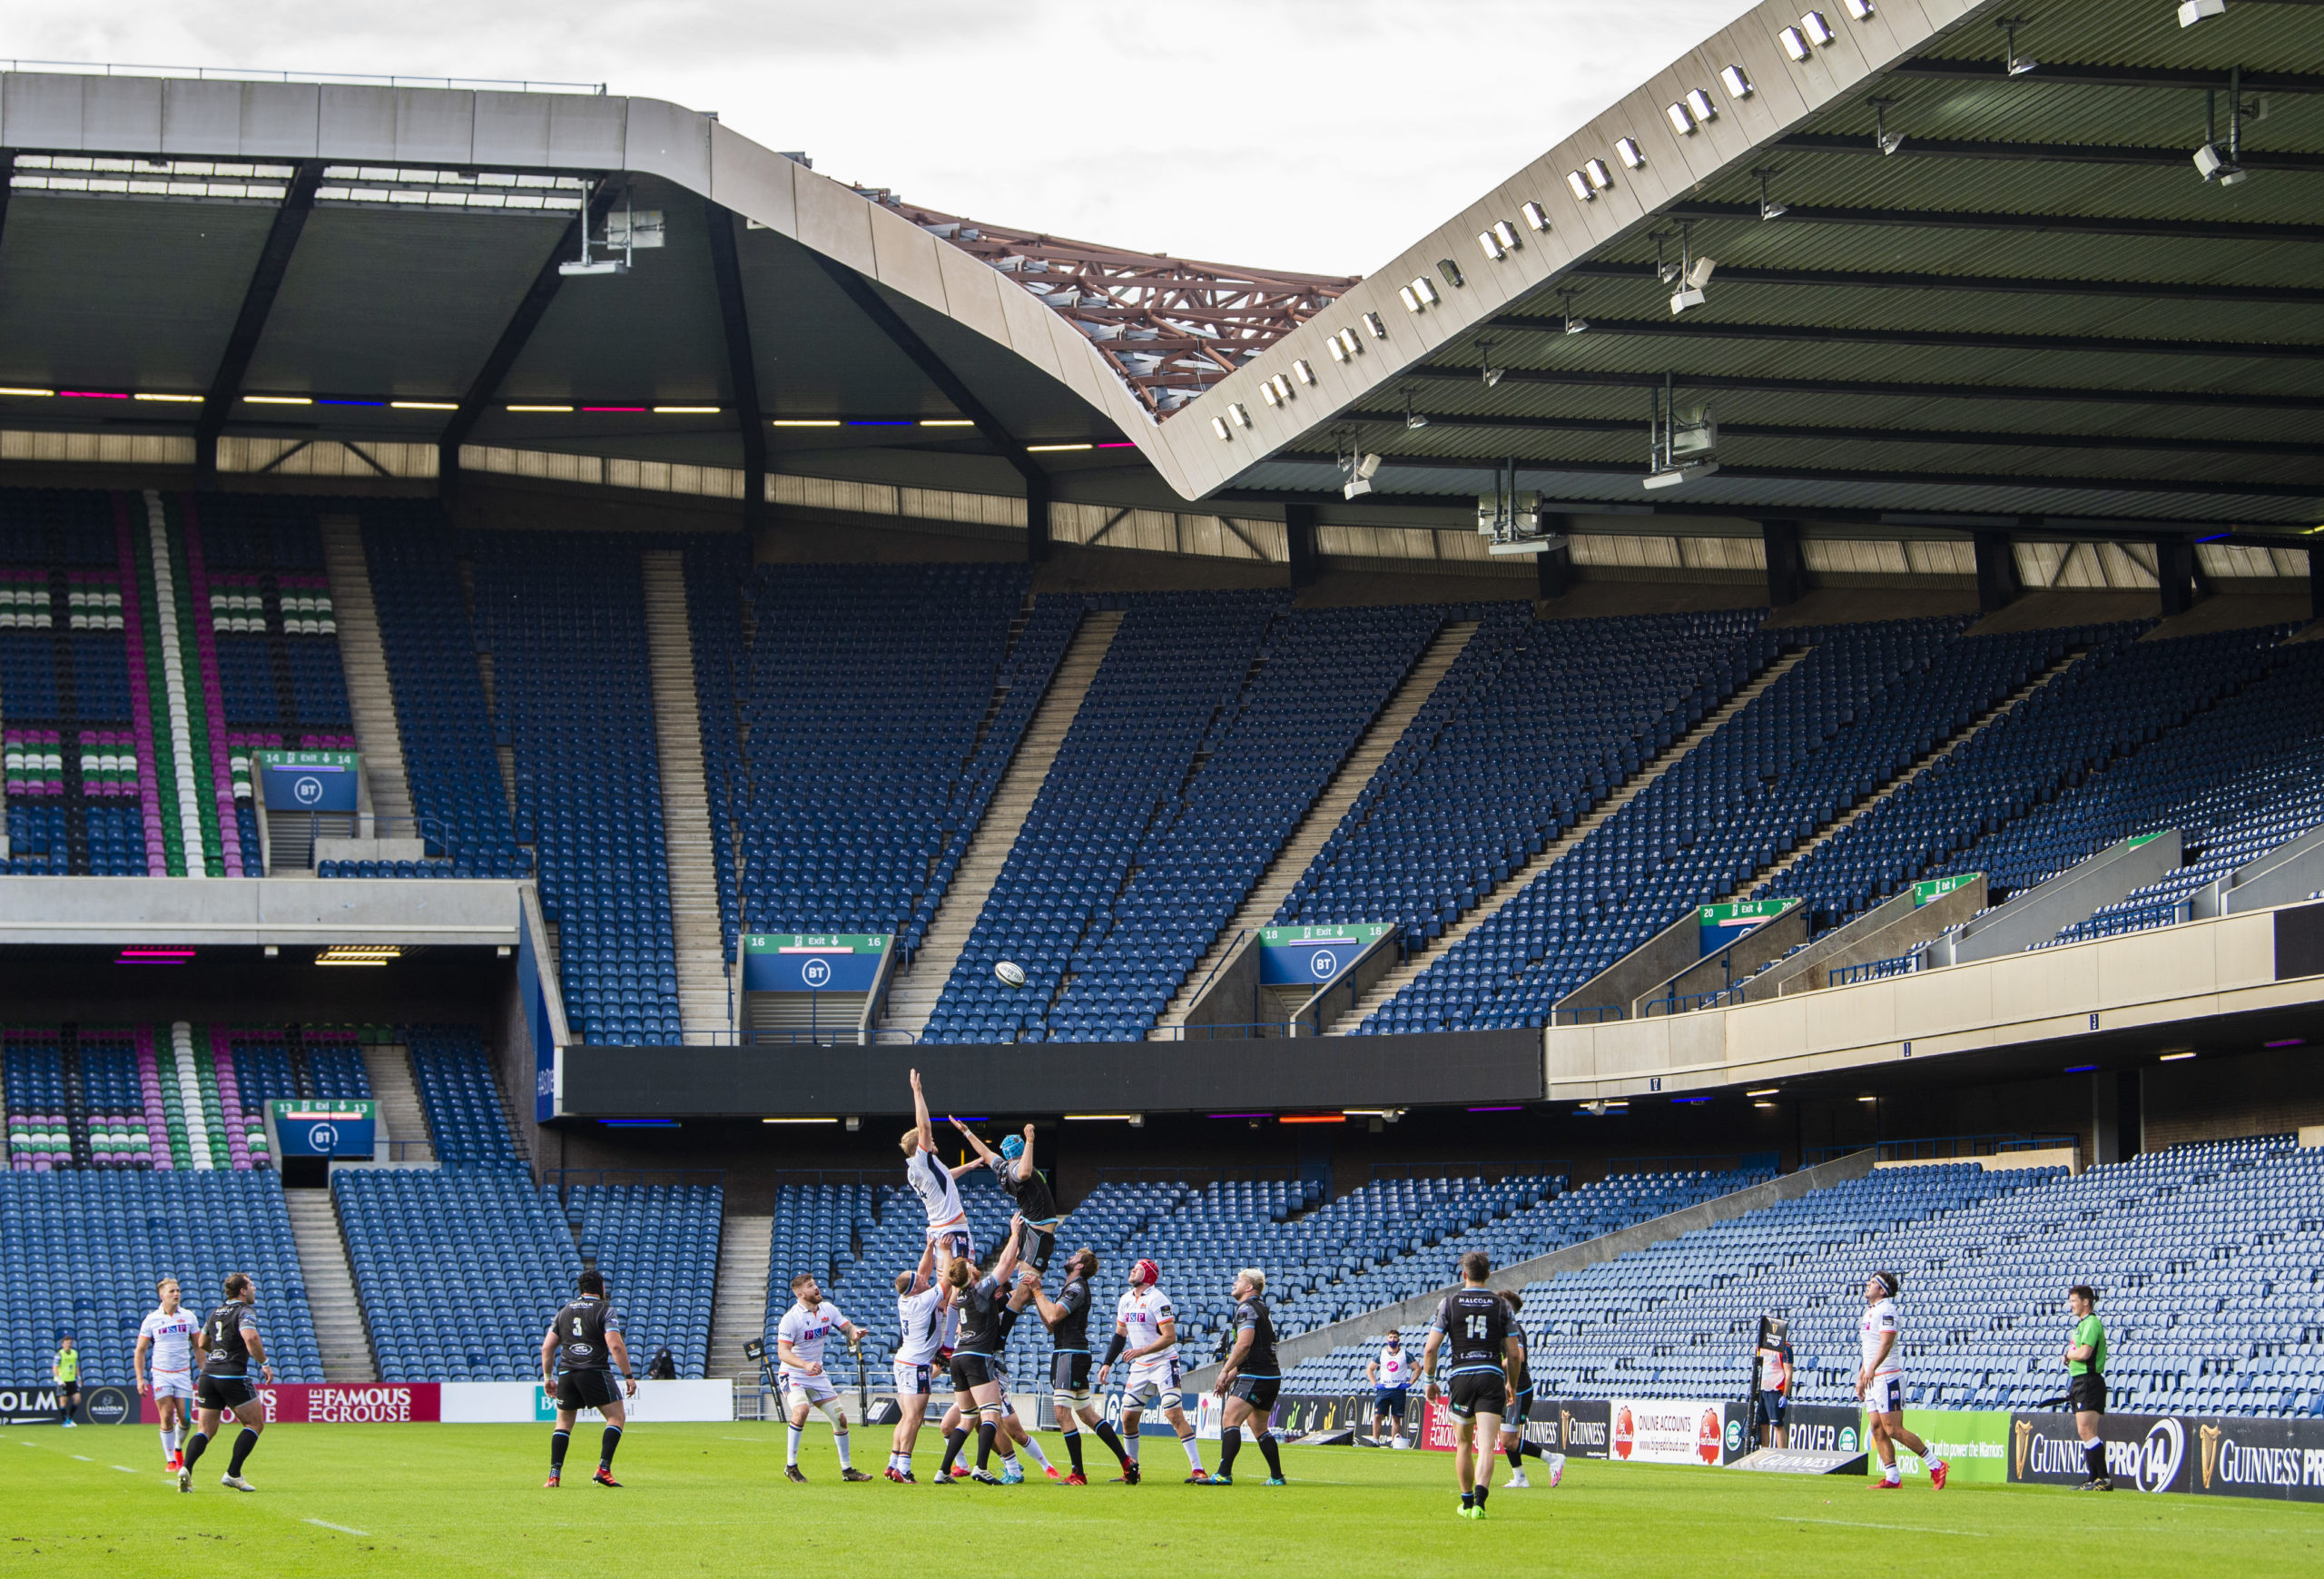 Edinburgh and Glasgow played to empty seats at Murrayfield in the first game after lockdown.